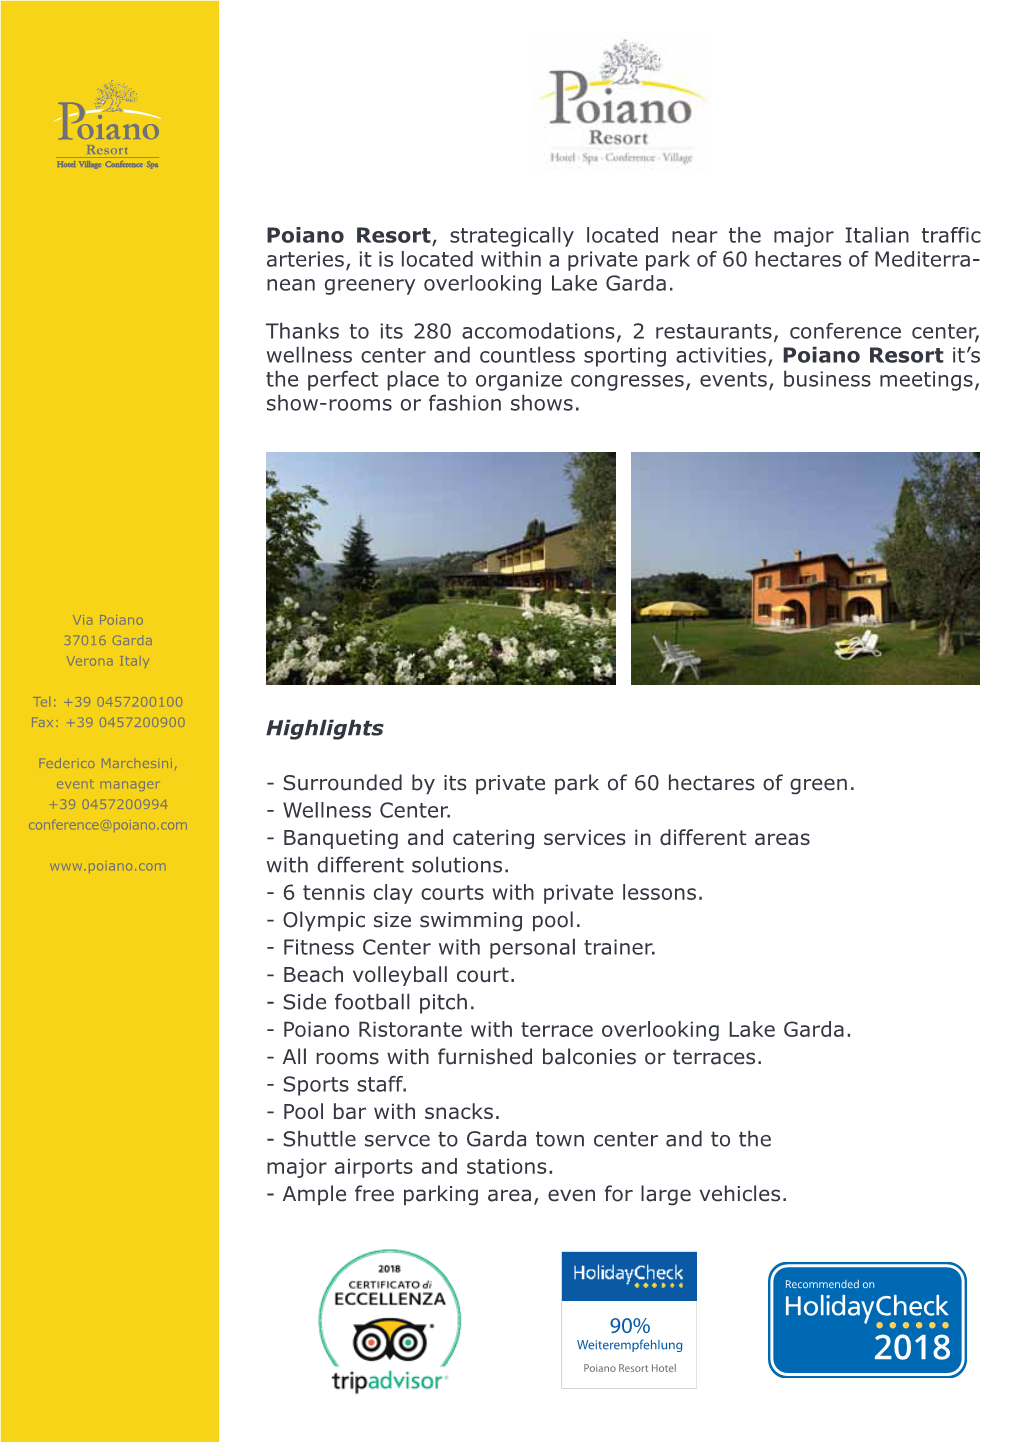 Poiano Resort Hotel Travel Information We Are on the East Bank of Lake Garda, in an Enviable Position at the Crossroads of Europe's Main Transport Links